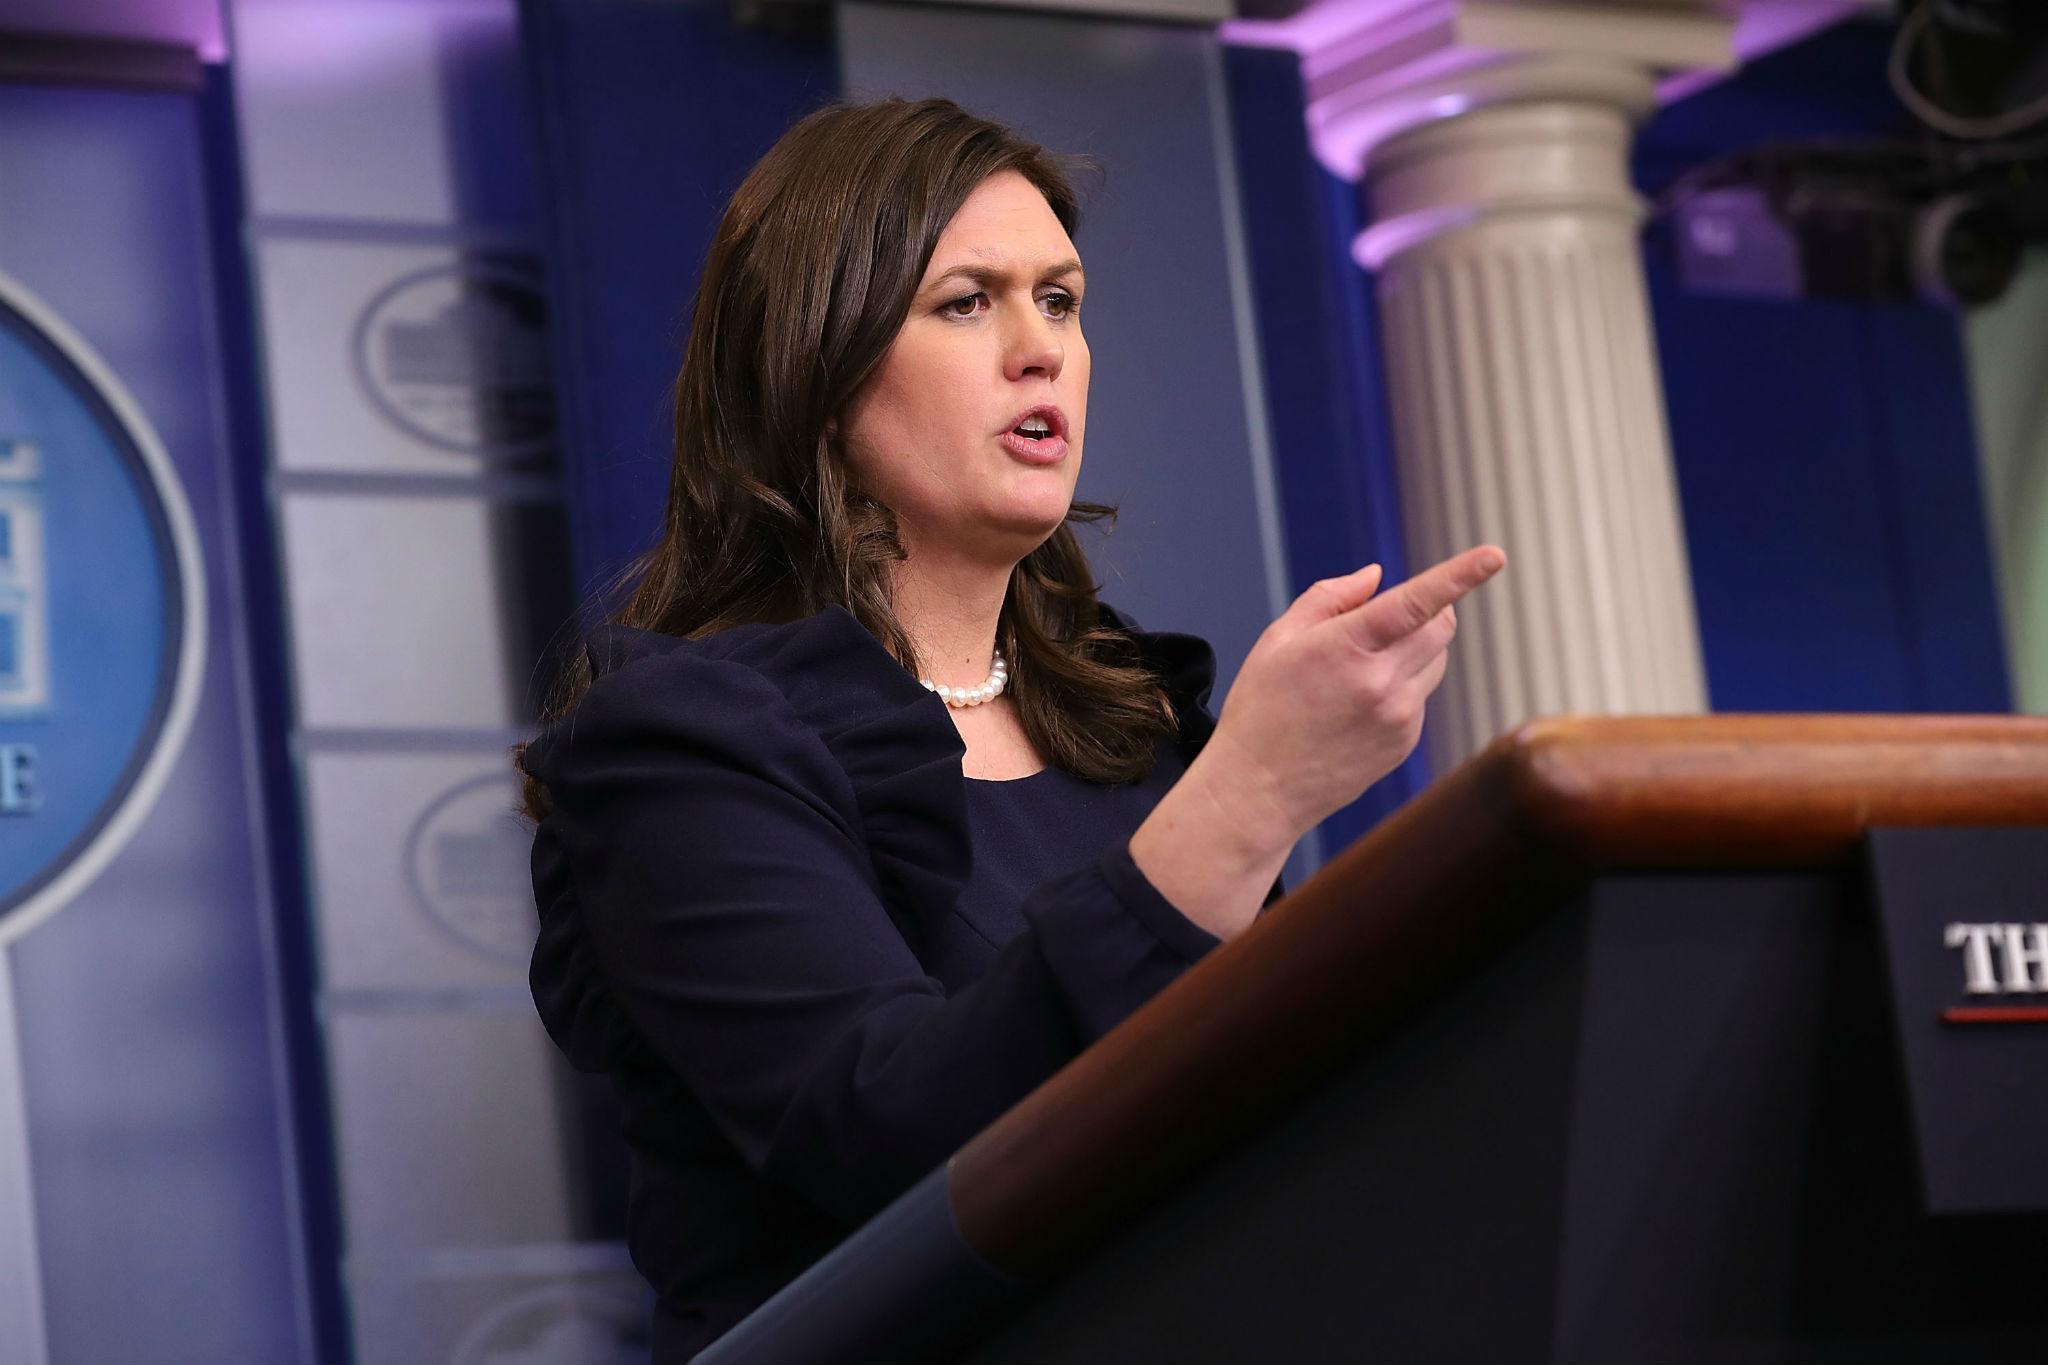 Speaking at the White House briefing, Press Secretary Sarah Huckabee Sanders declined to reveal specifics about the White House’s immigration framework.